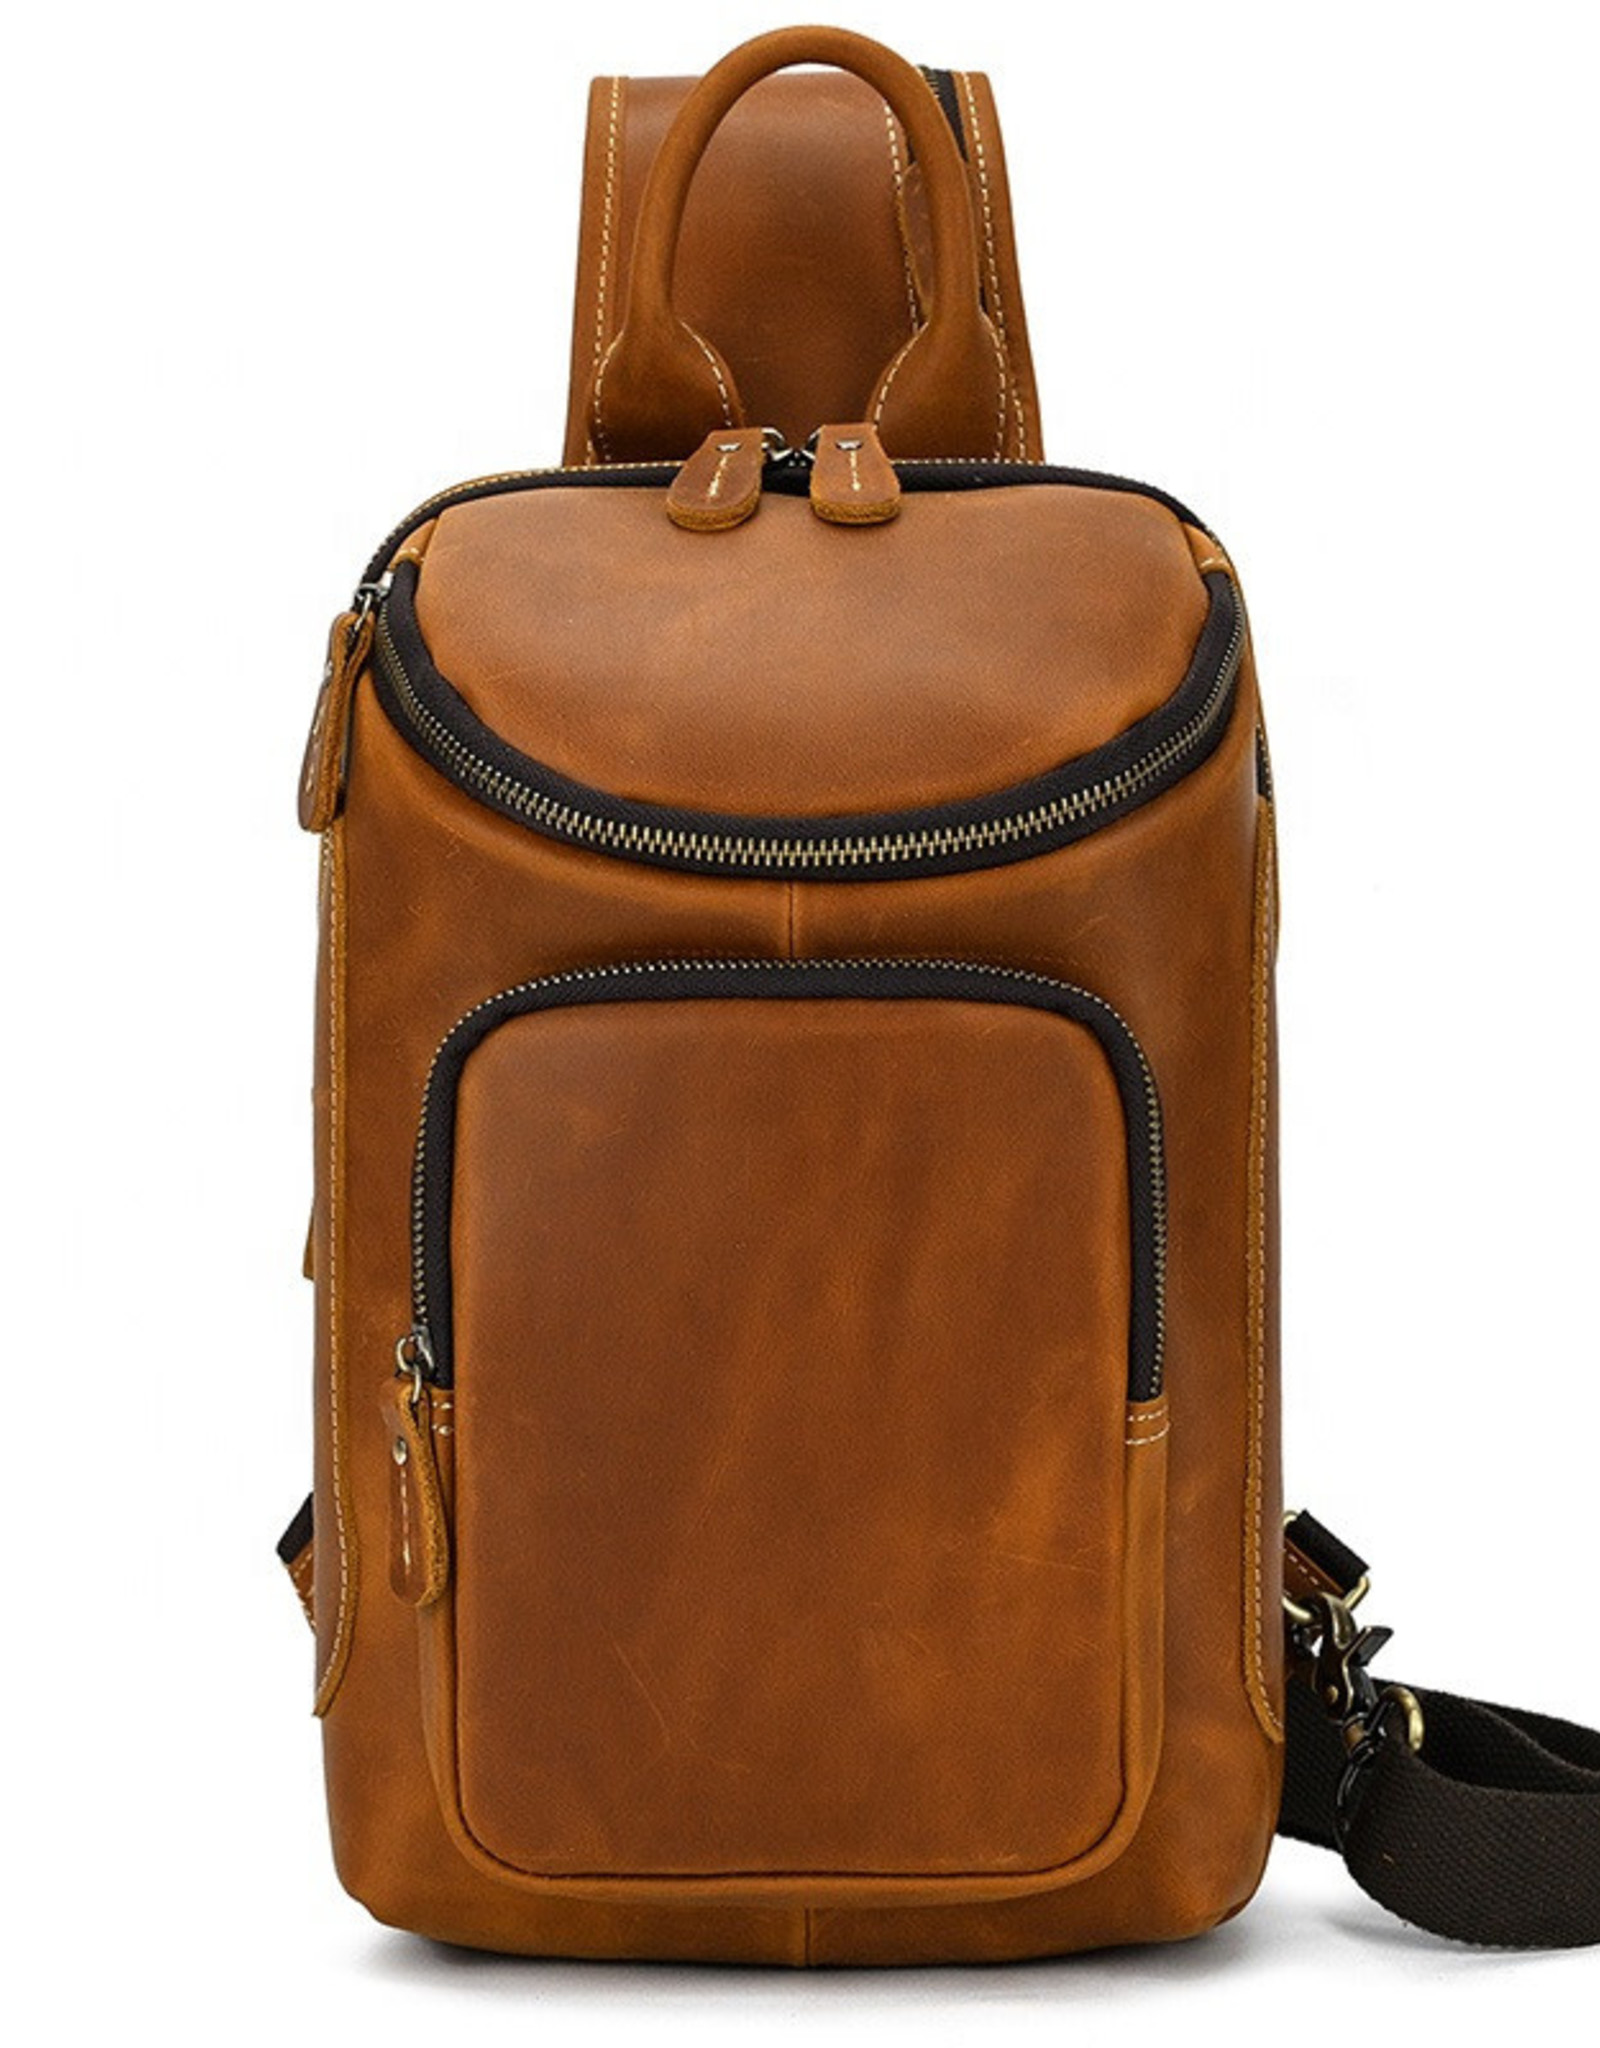 Justin Chest Bag Genuine Leather